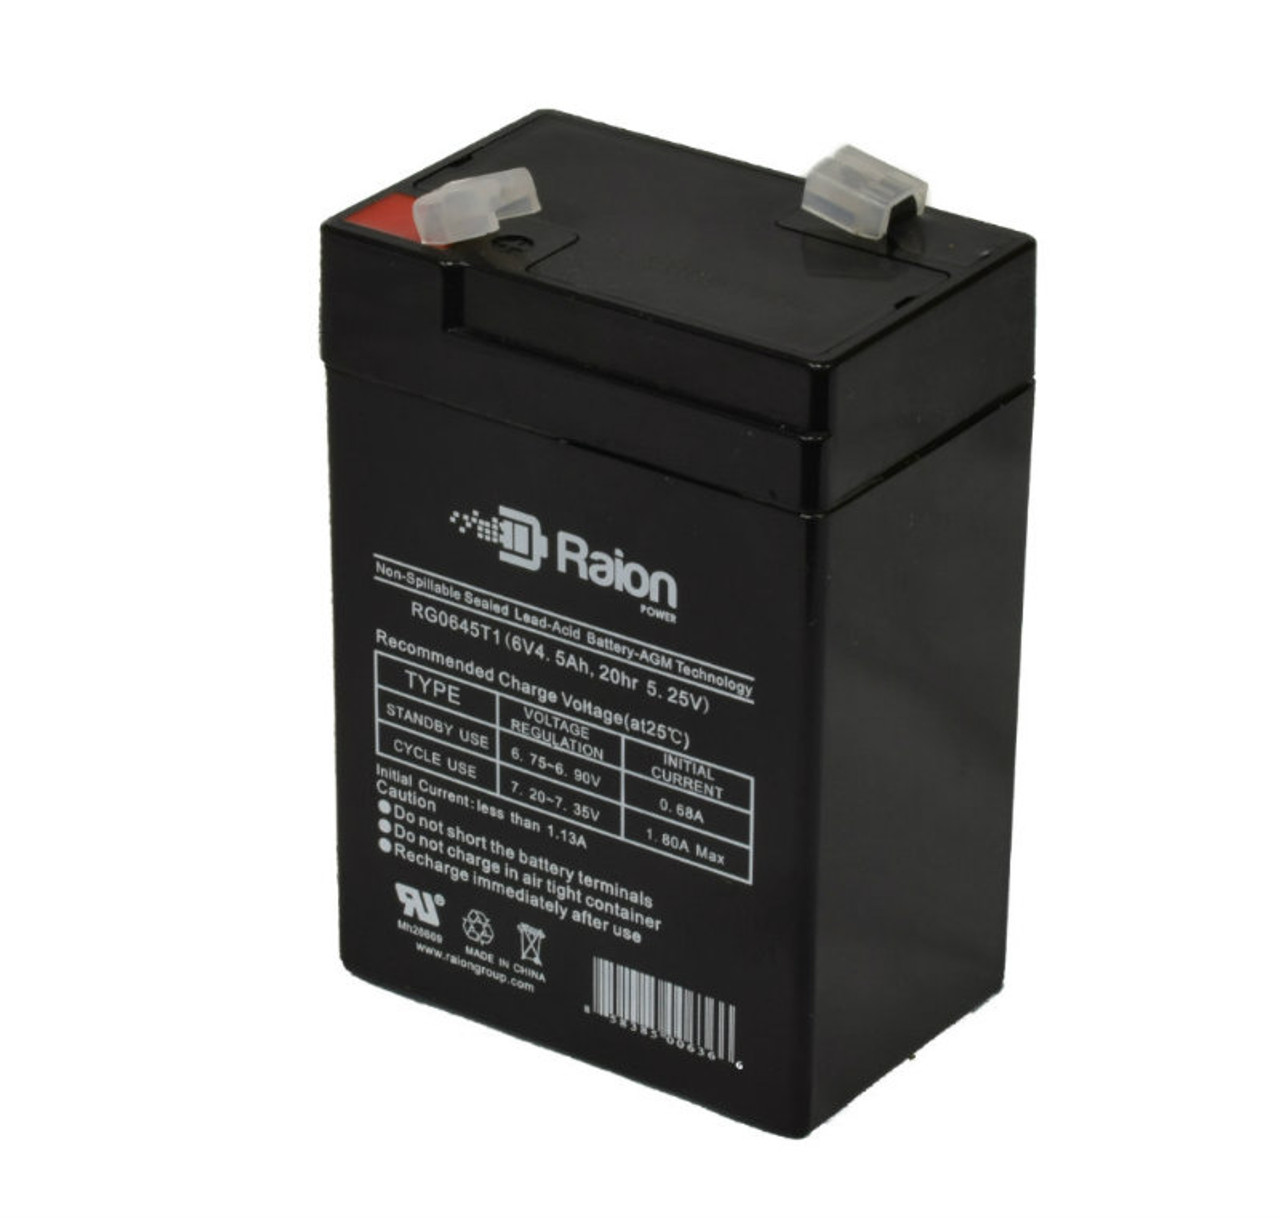 Raion Power RG0645T1 6V 4.5Ah Replacement Battery Cartridge for Oracle FS645